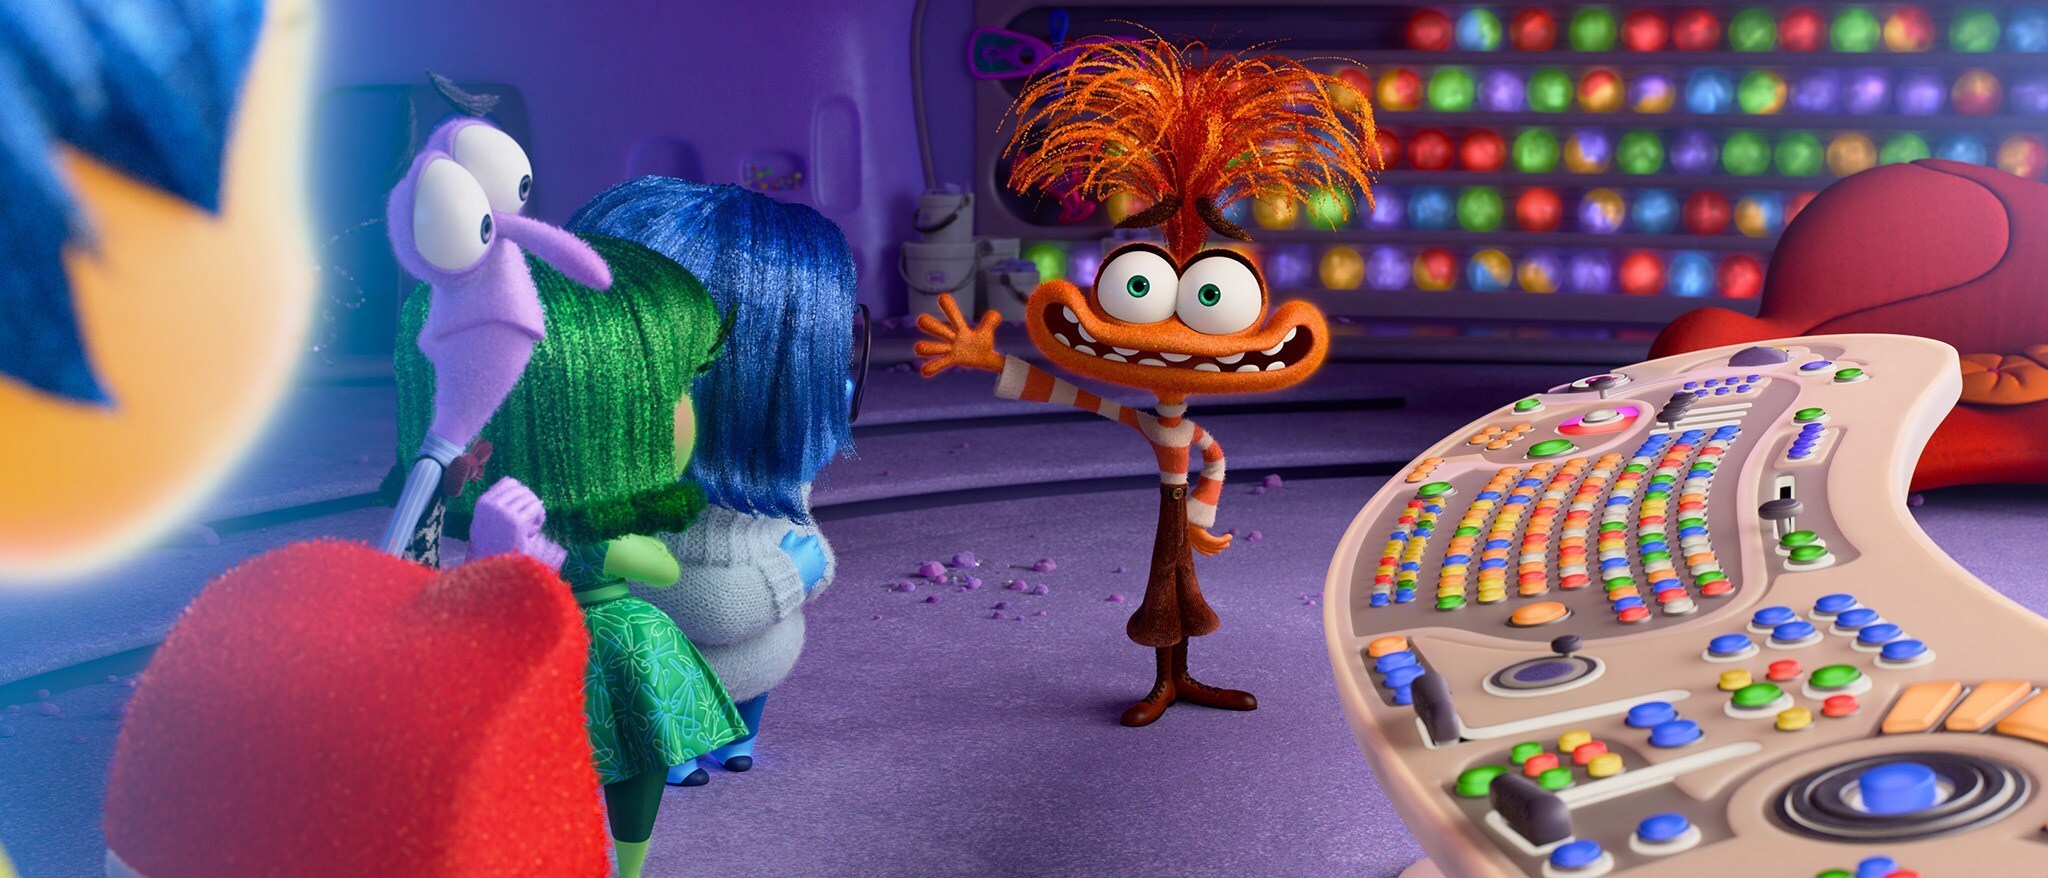 Inside Out 2 - Featured Content Banner - TH